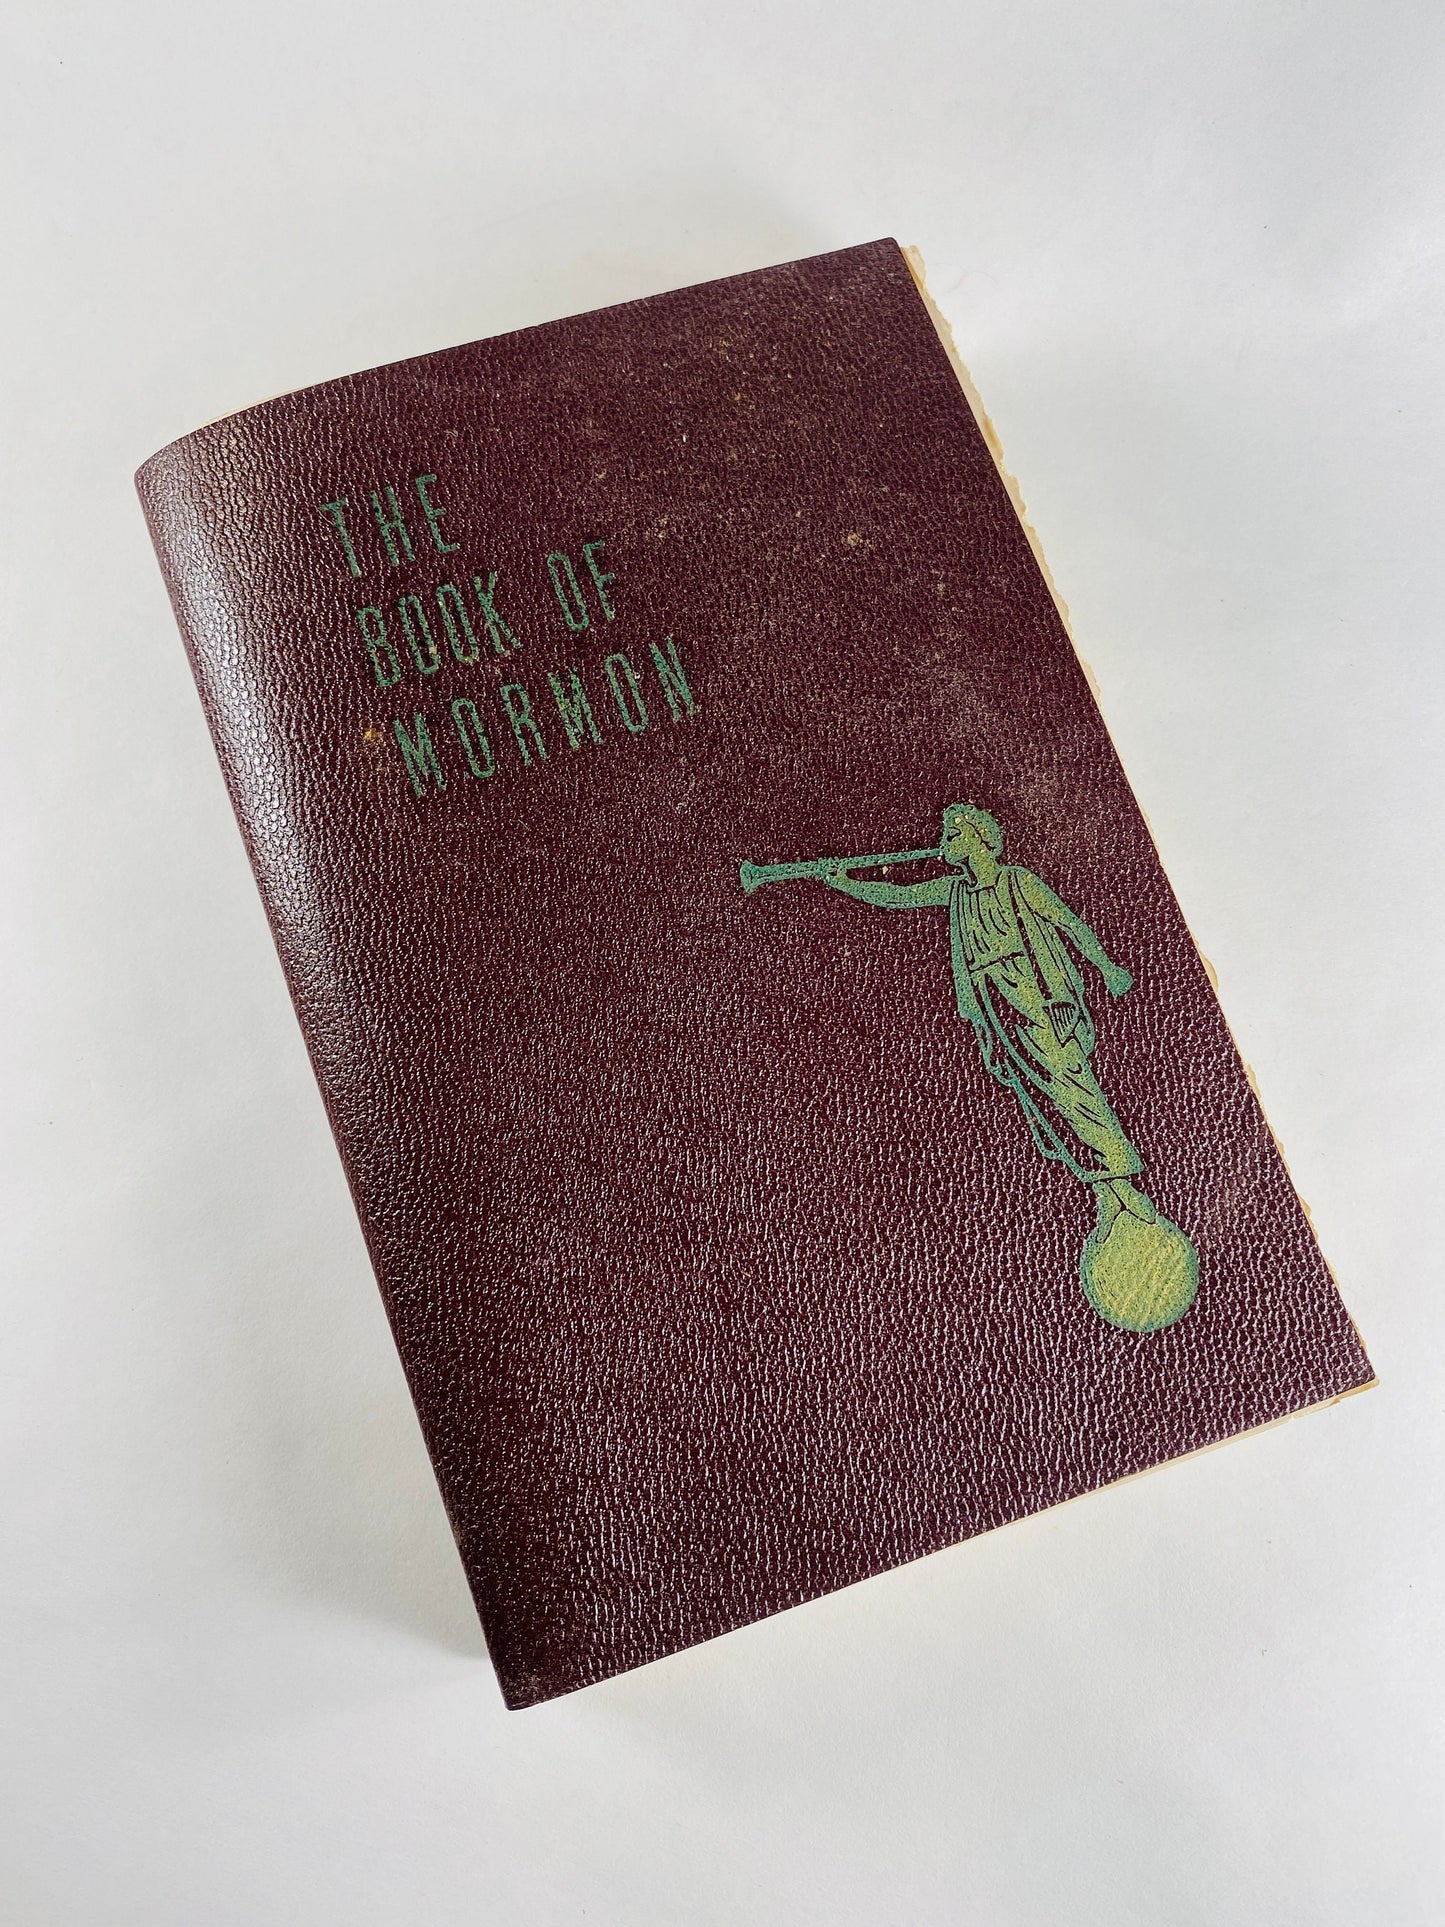 Book of Mormon vintage collectible circa 1950 Church of Latter Day Saints issued for the World's Fair Red soft leather cover LDS